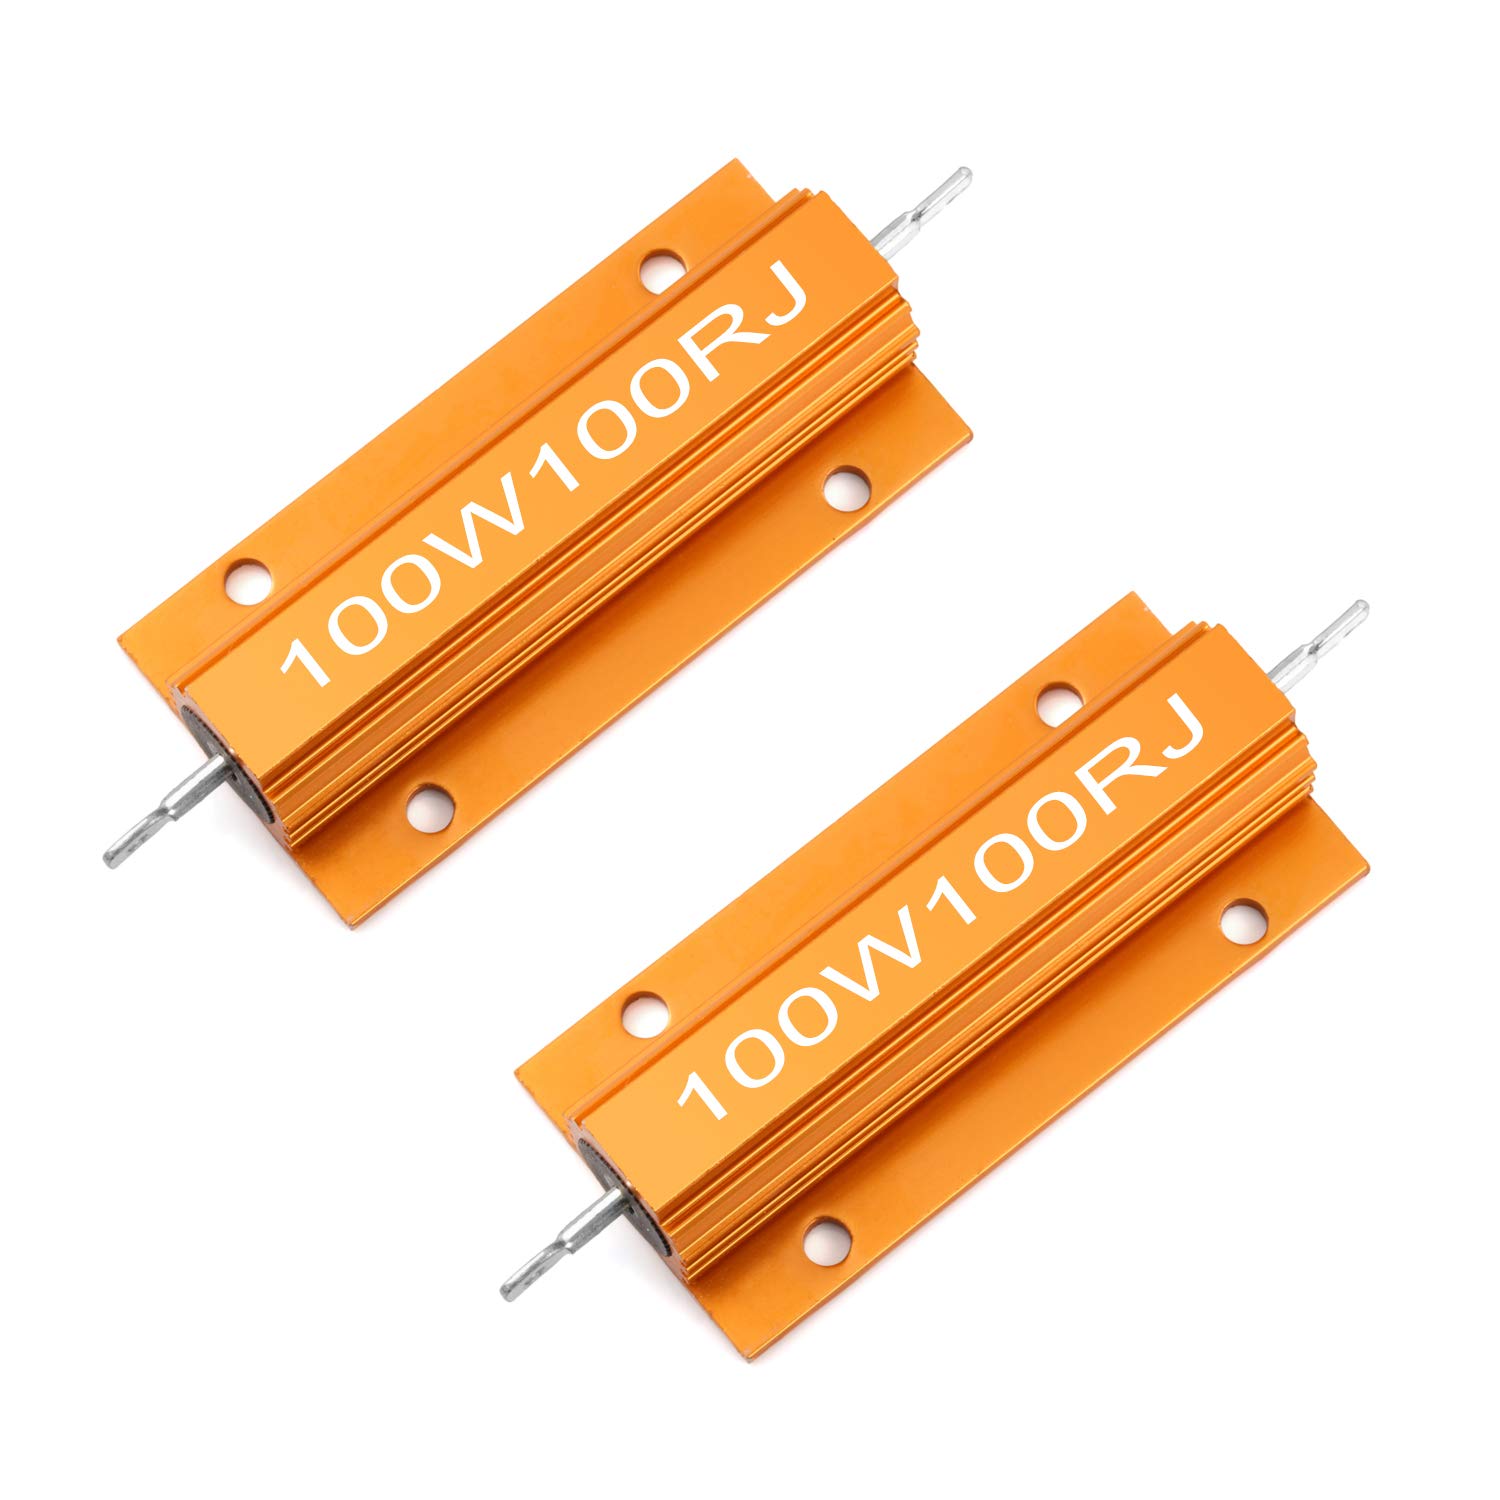 Chanzon 2pcs Wirewound Aluminum Shell Resistor 100 Ω ohm 100W ±5% Tolerance 100R Rohs Certified